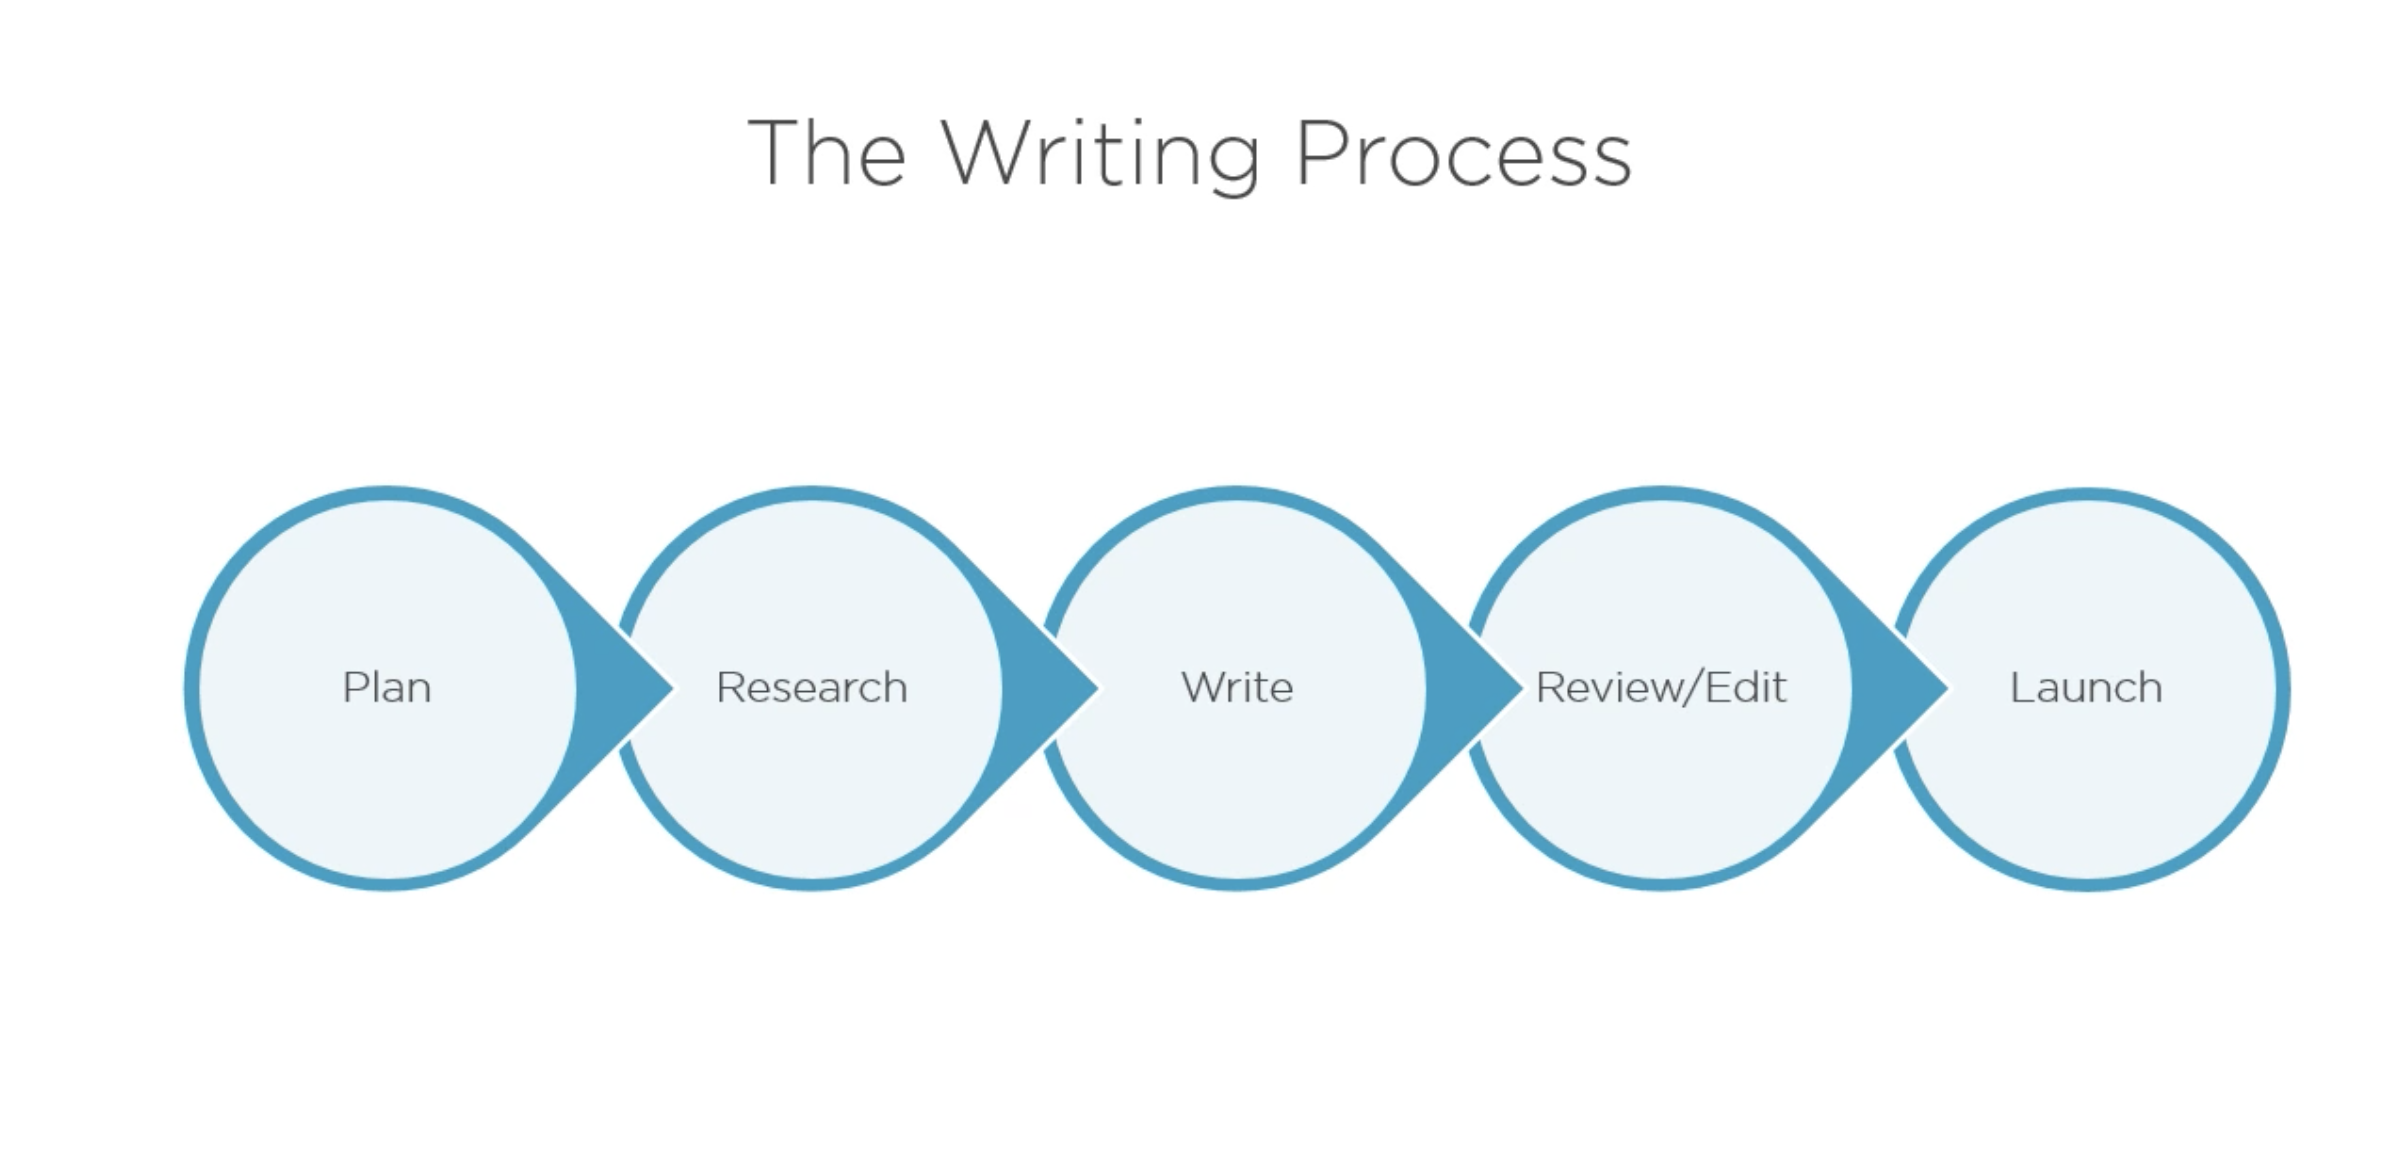 Phases in writing process